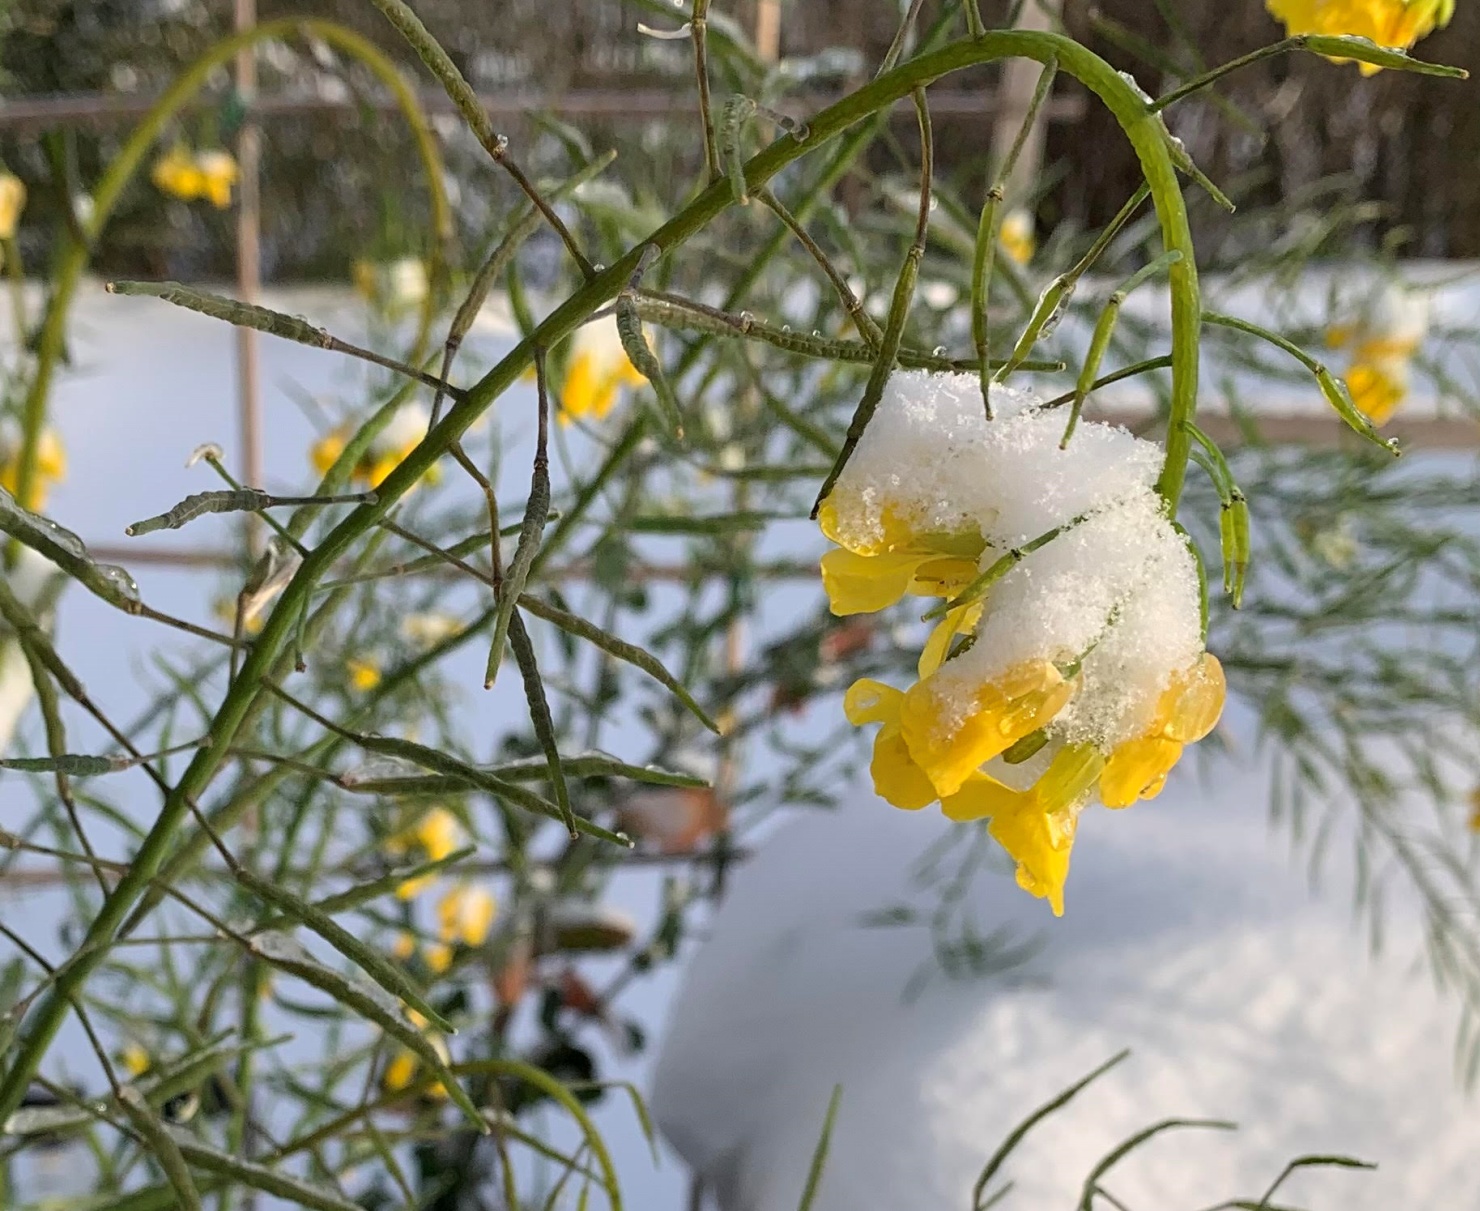 You are currently viewing 4 Easy Steps to Prepare Your Garden for Winter